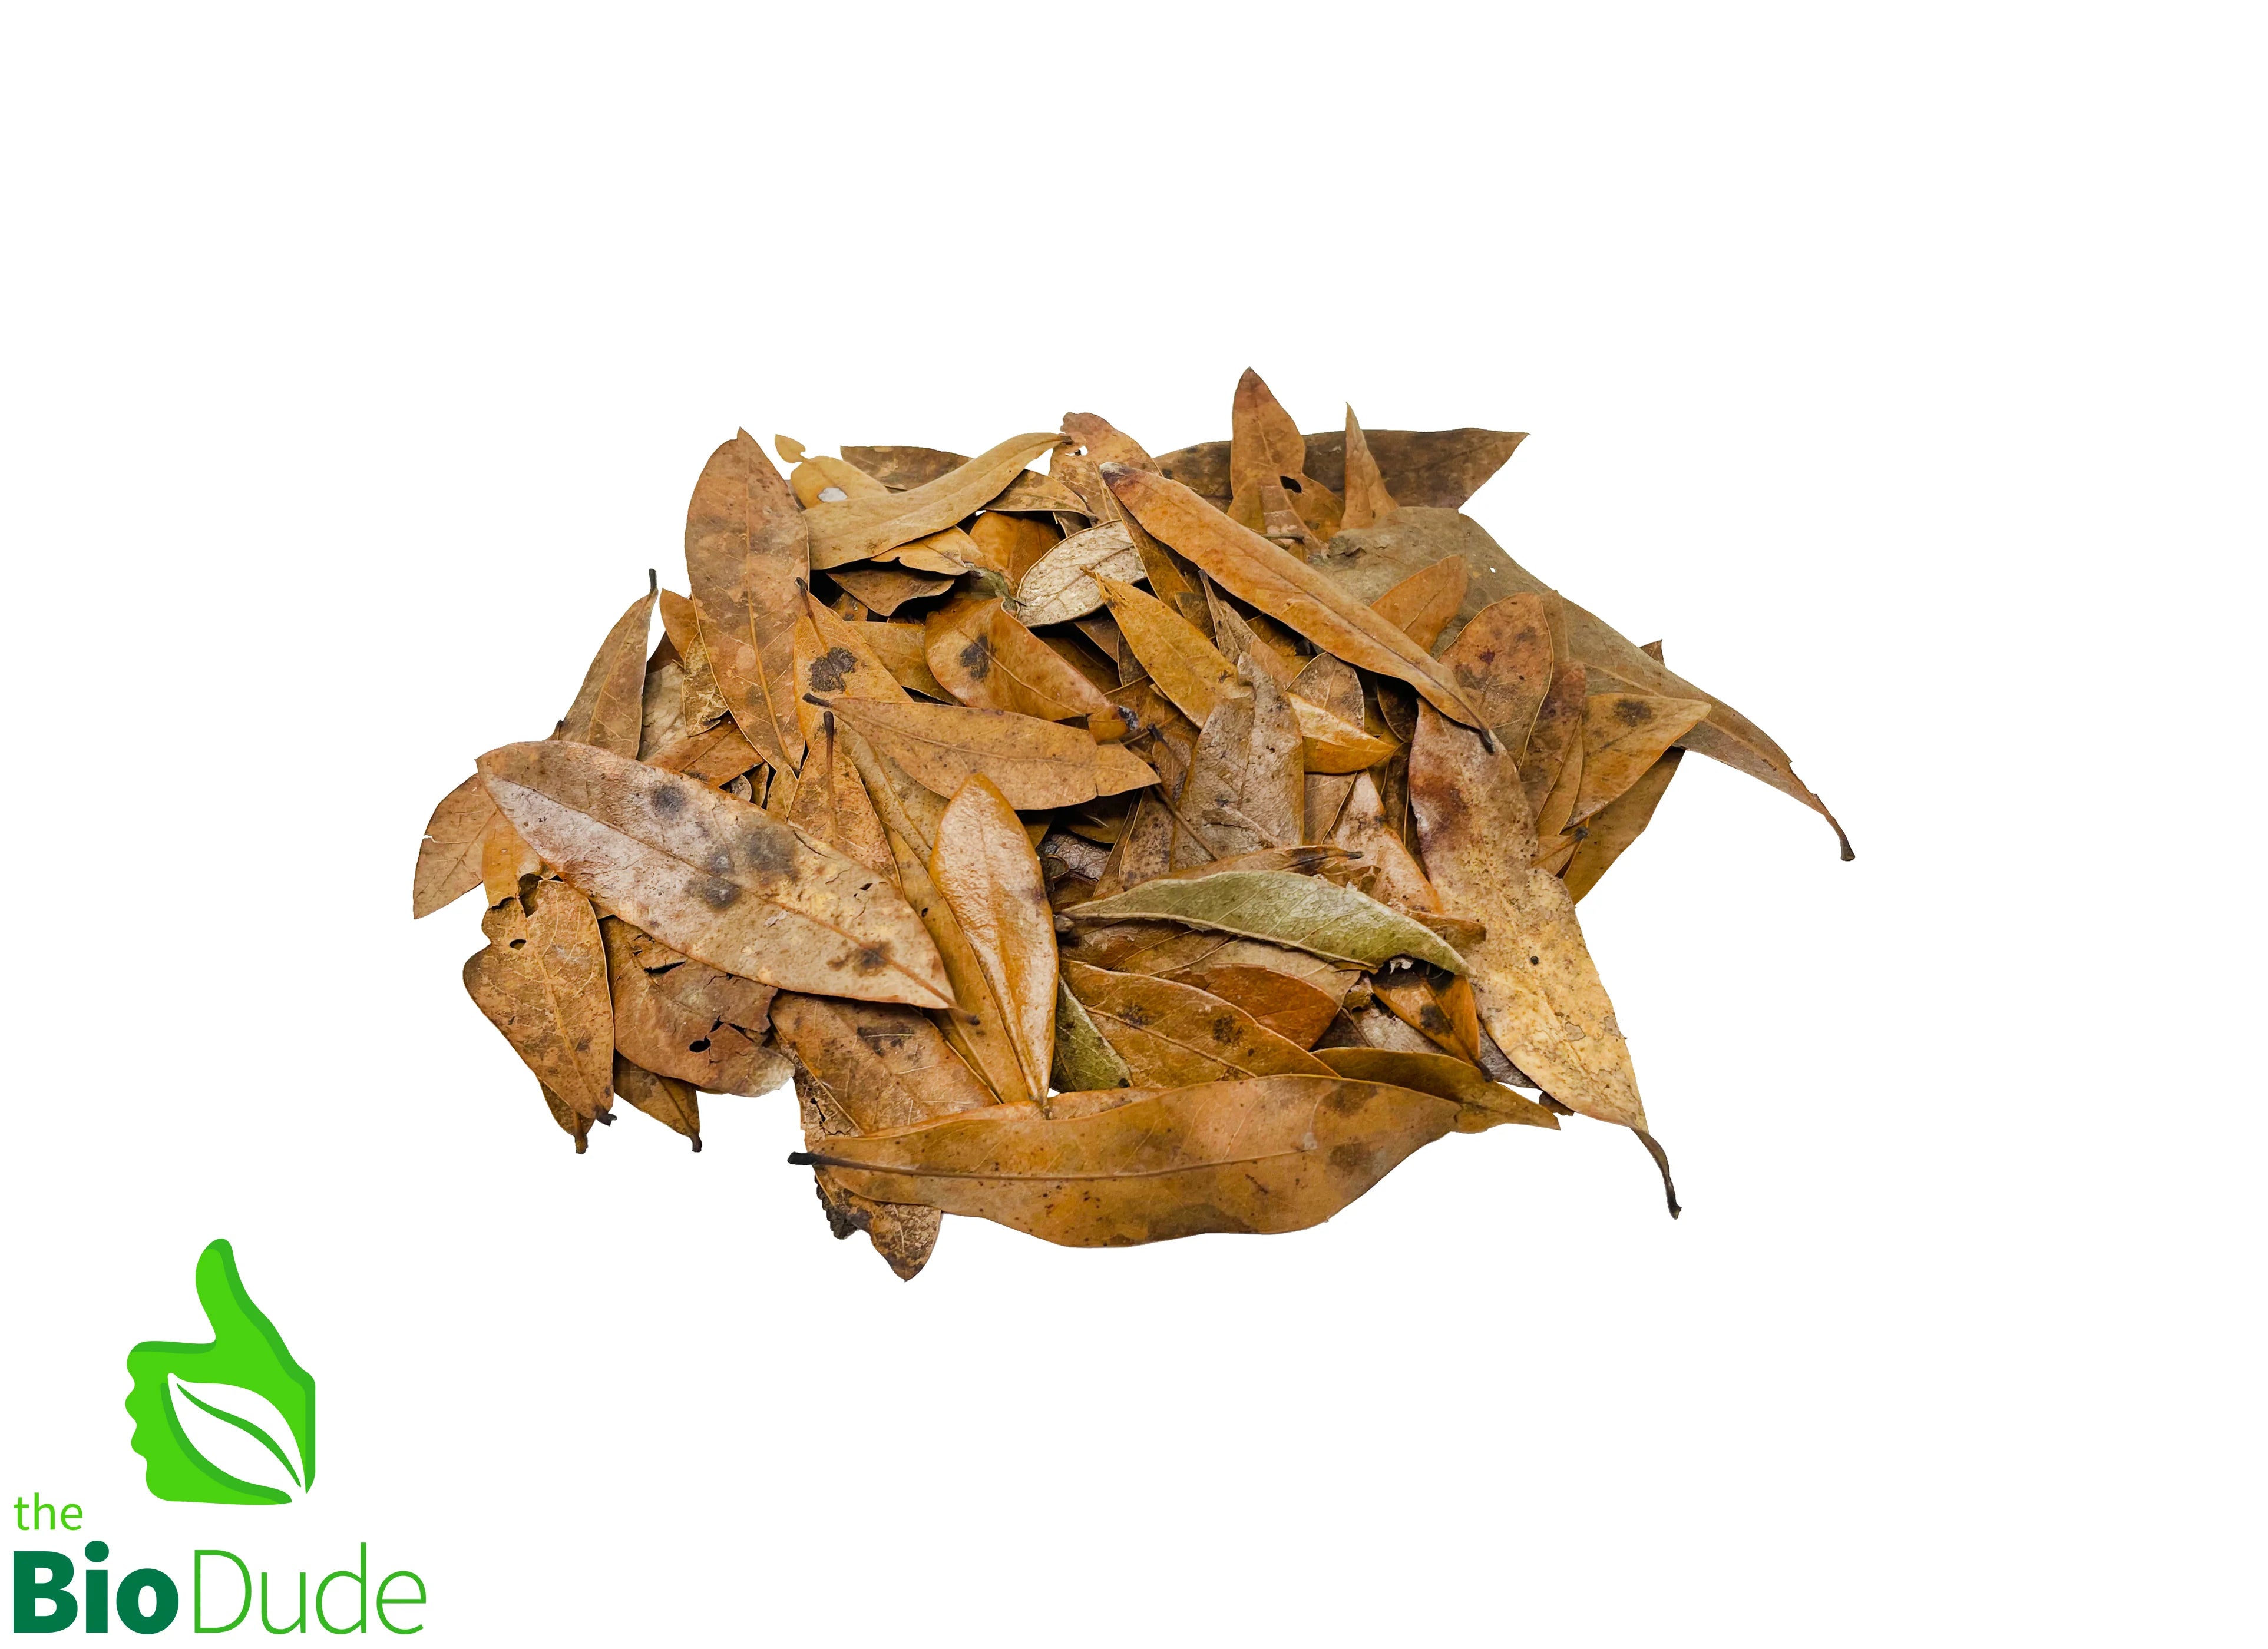 Why is Leaf Litter and other forms of biodegradables very important in your bioactive vivarium?